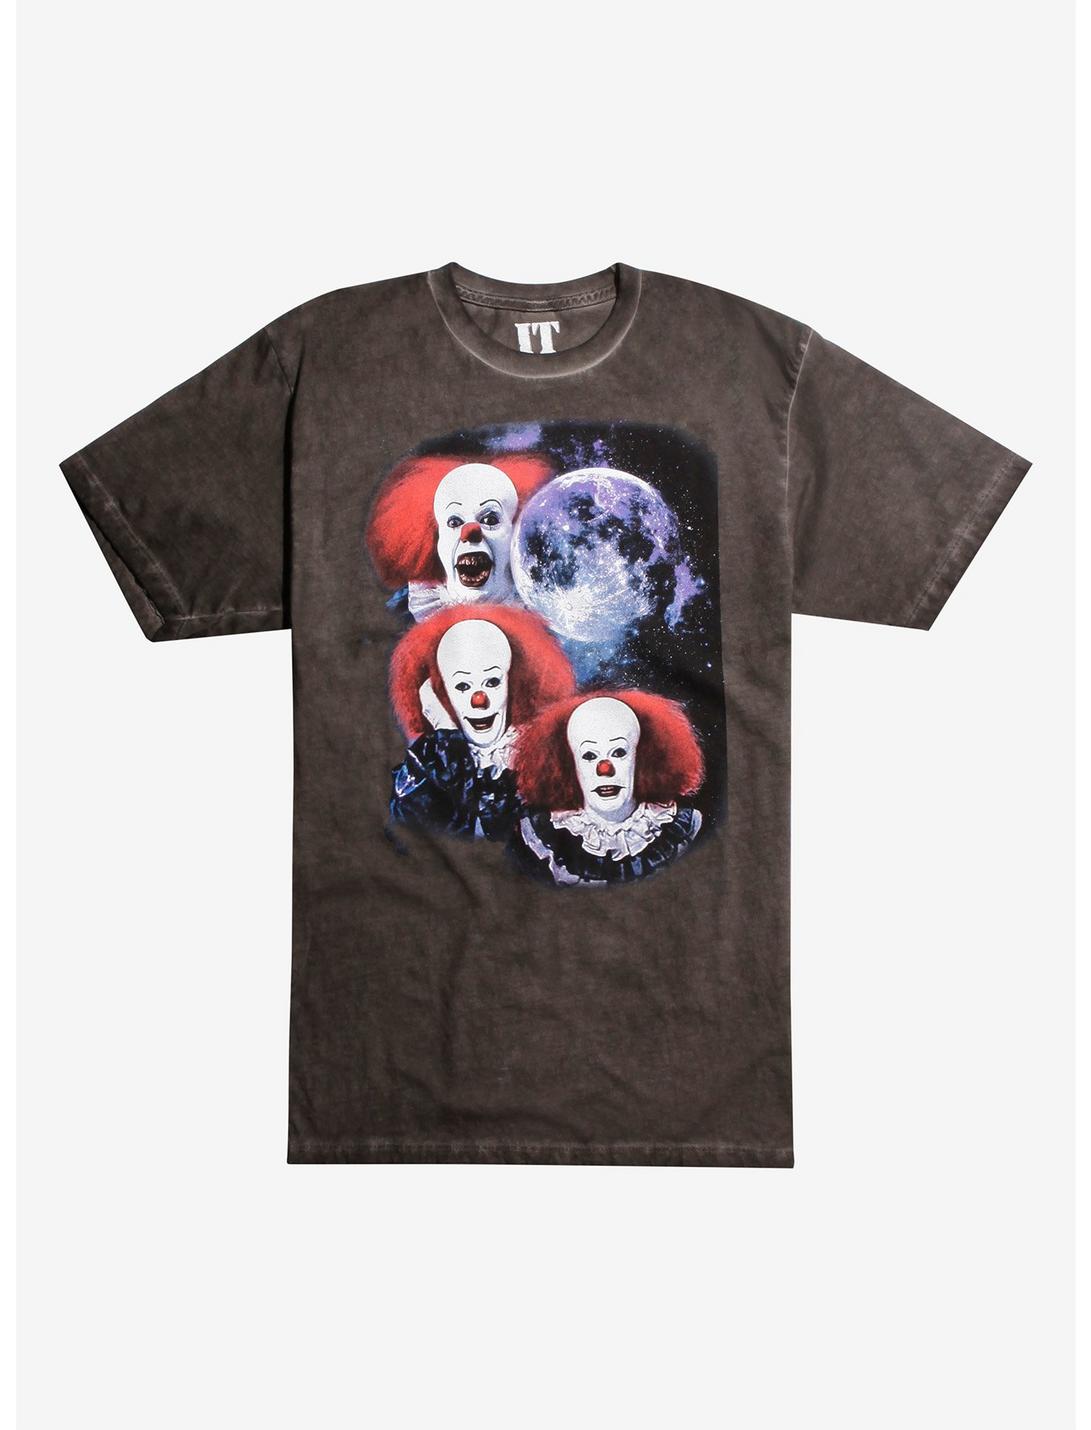 IT Pennywise Moon T-Shirt, BLACK, hi-res